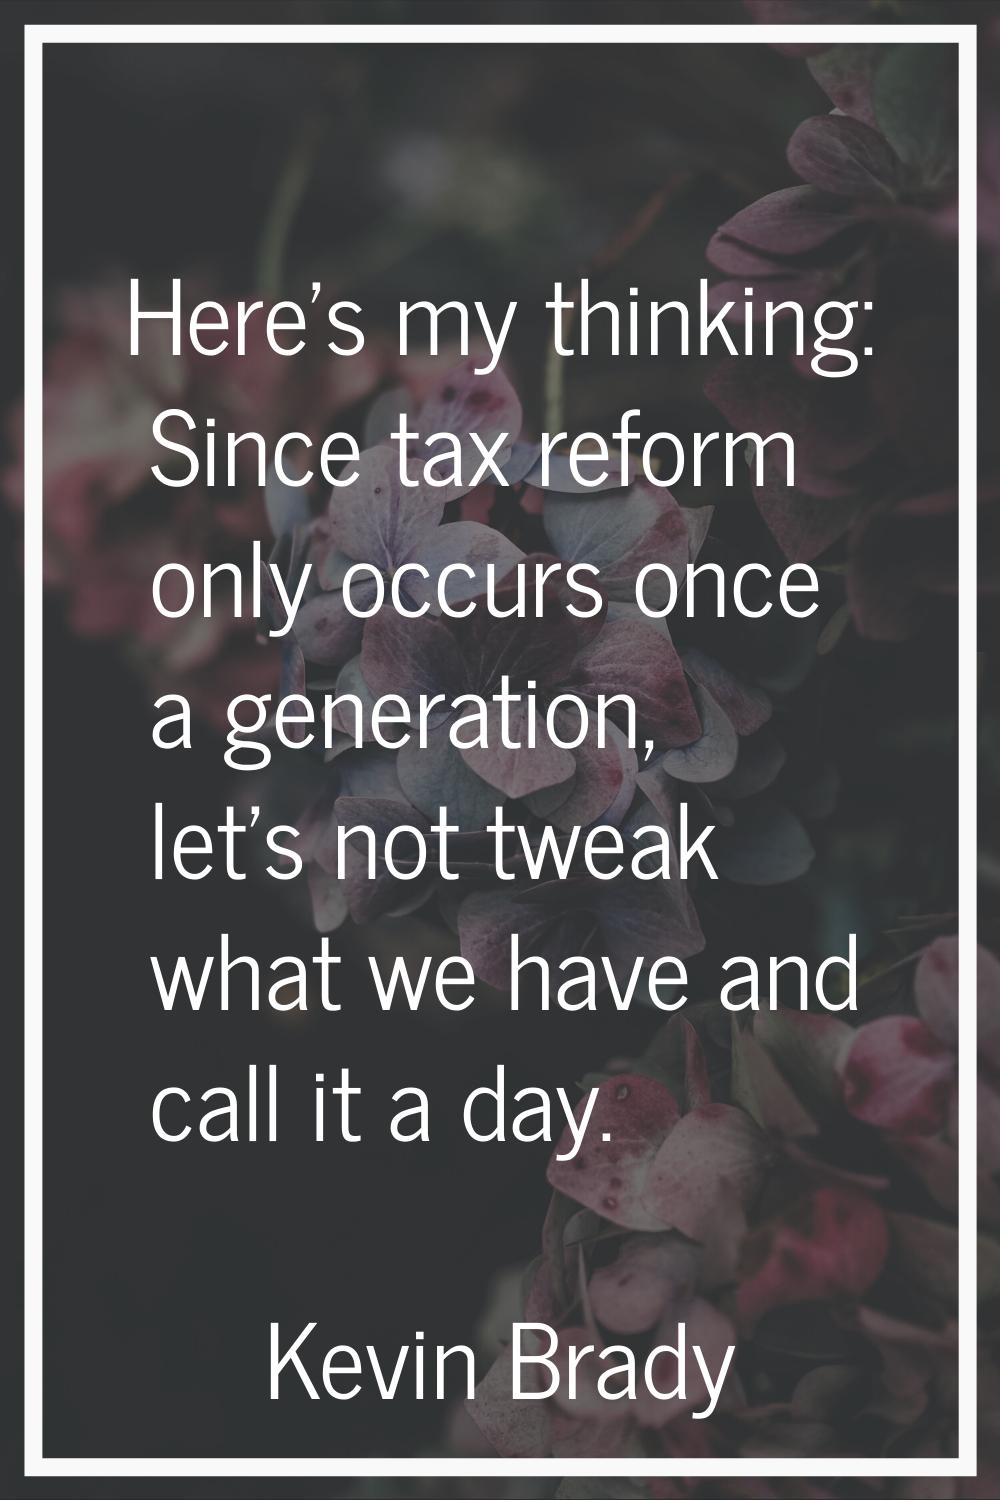 Here's my thinking: Since tax reform only occurs once a generation, let's not tweak what we have an